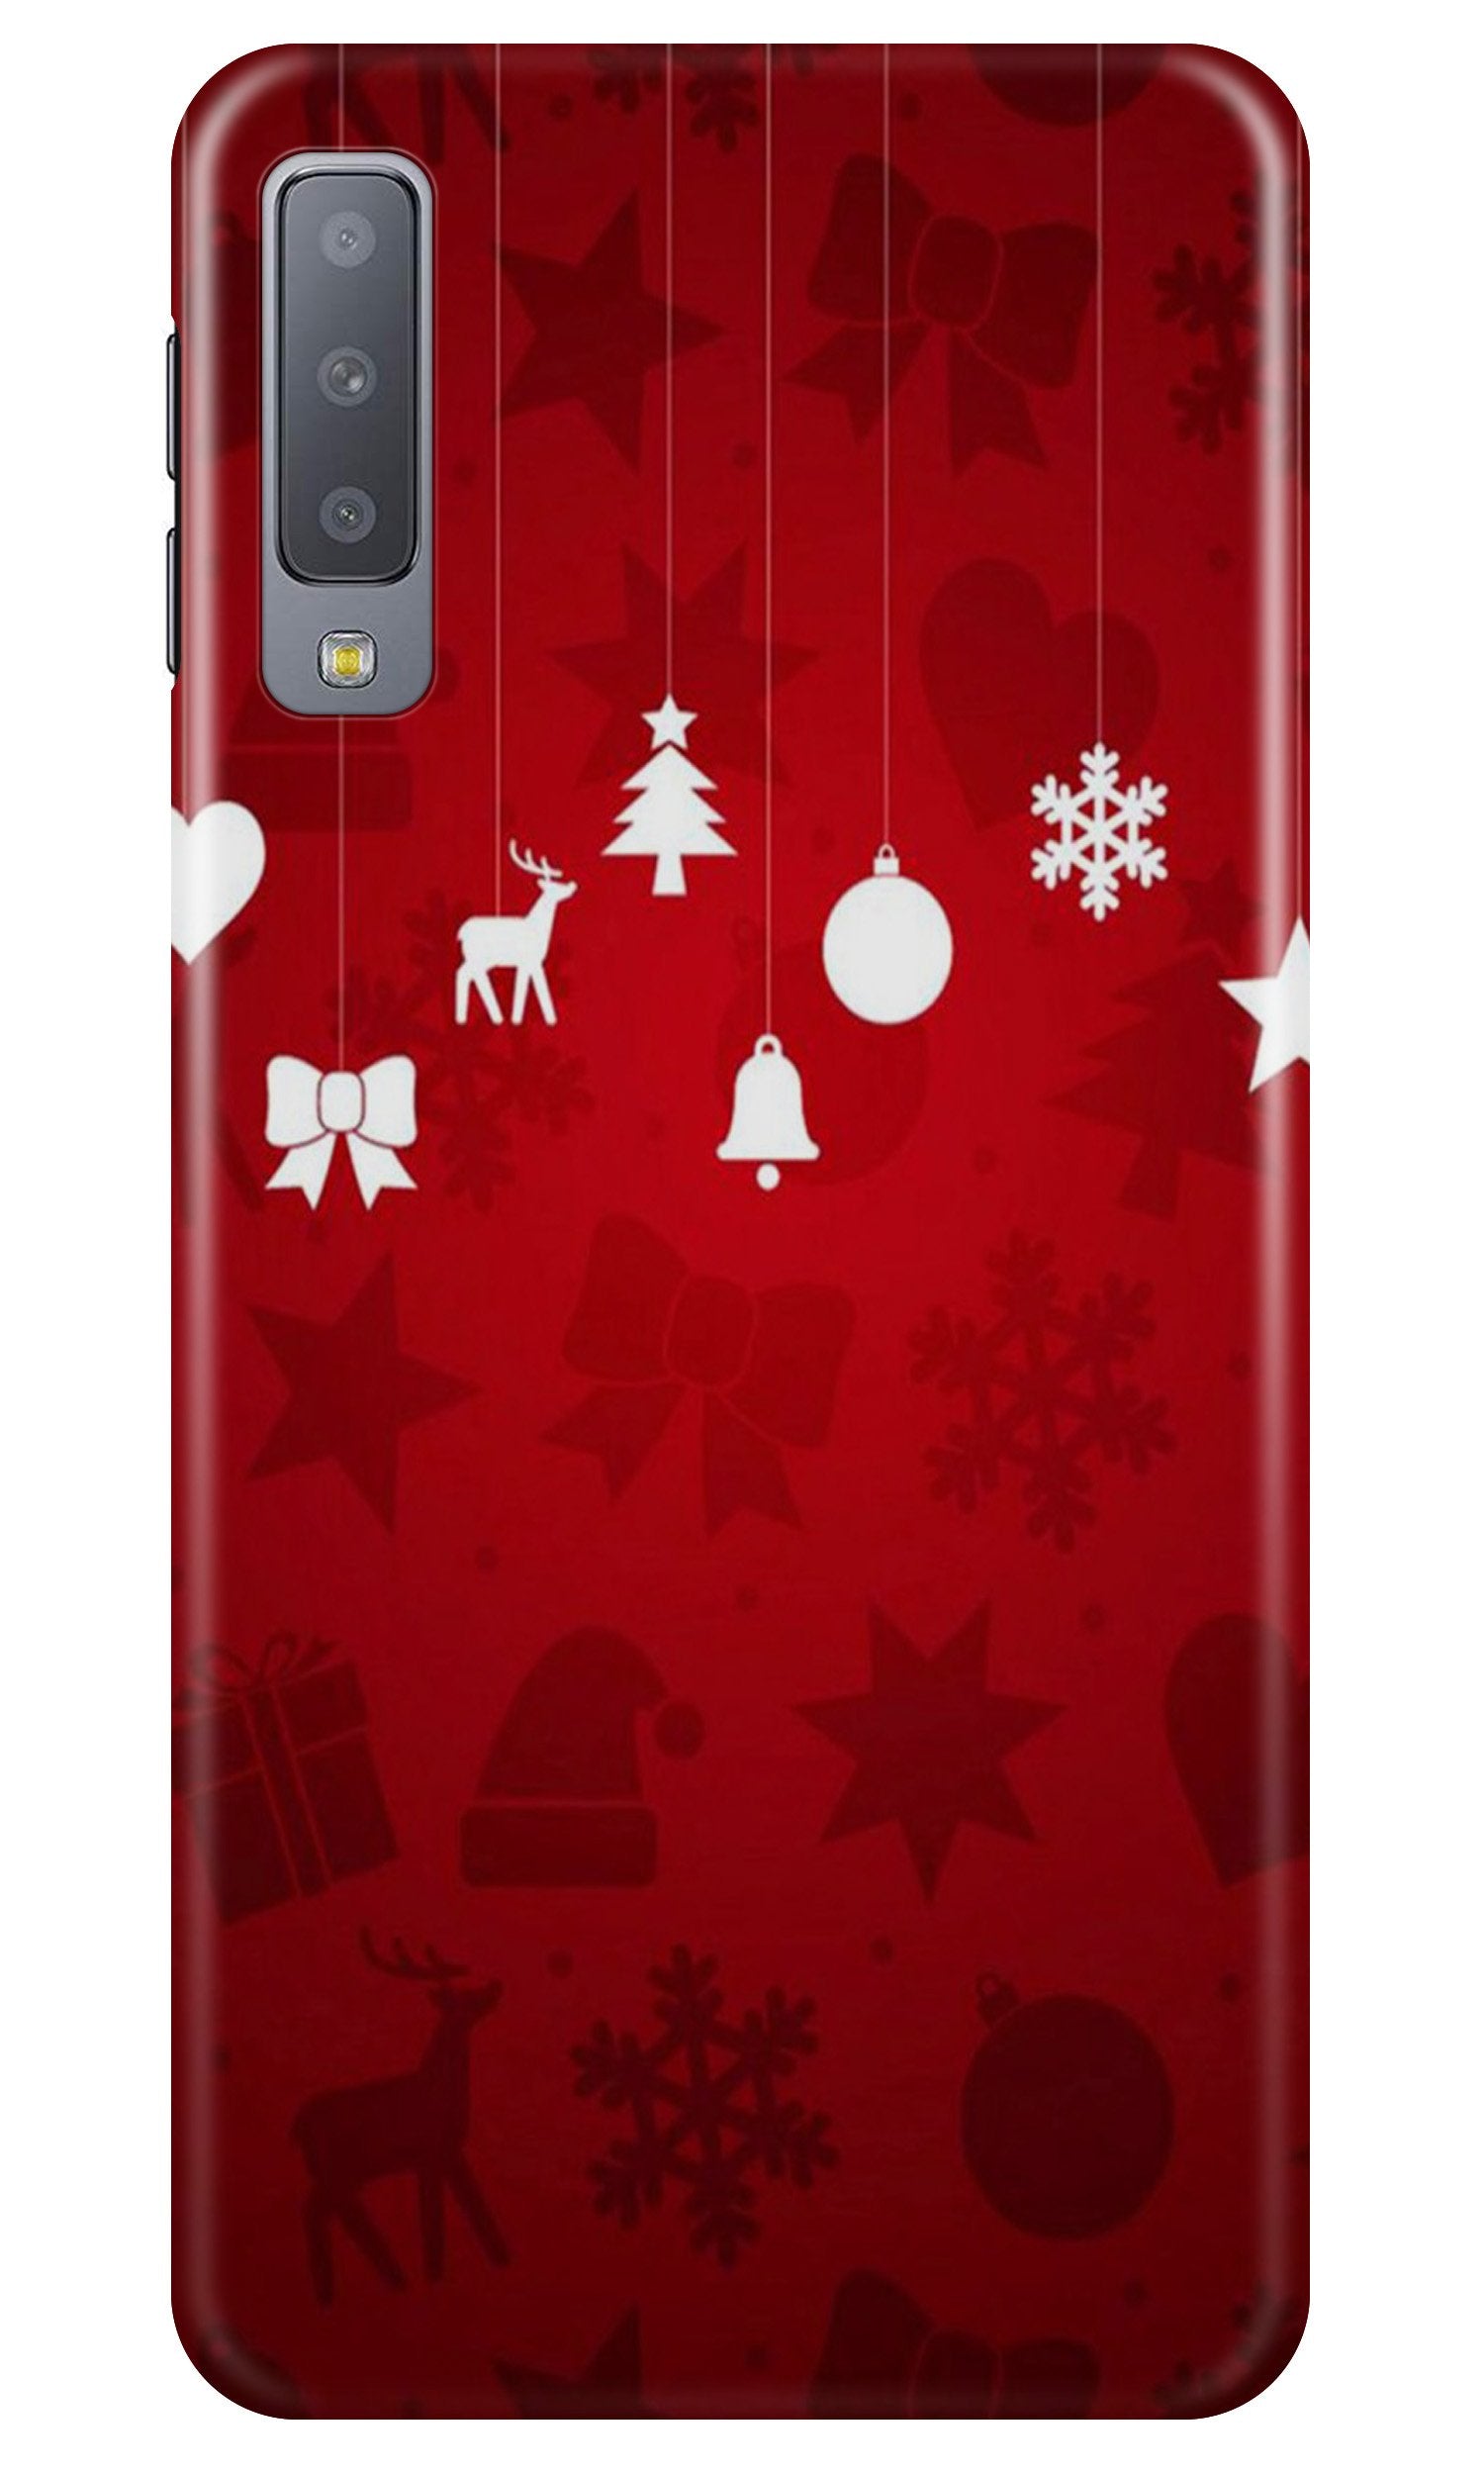 Christmas Case for Galaxy A7 (2018)